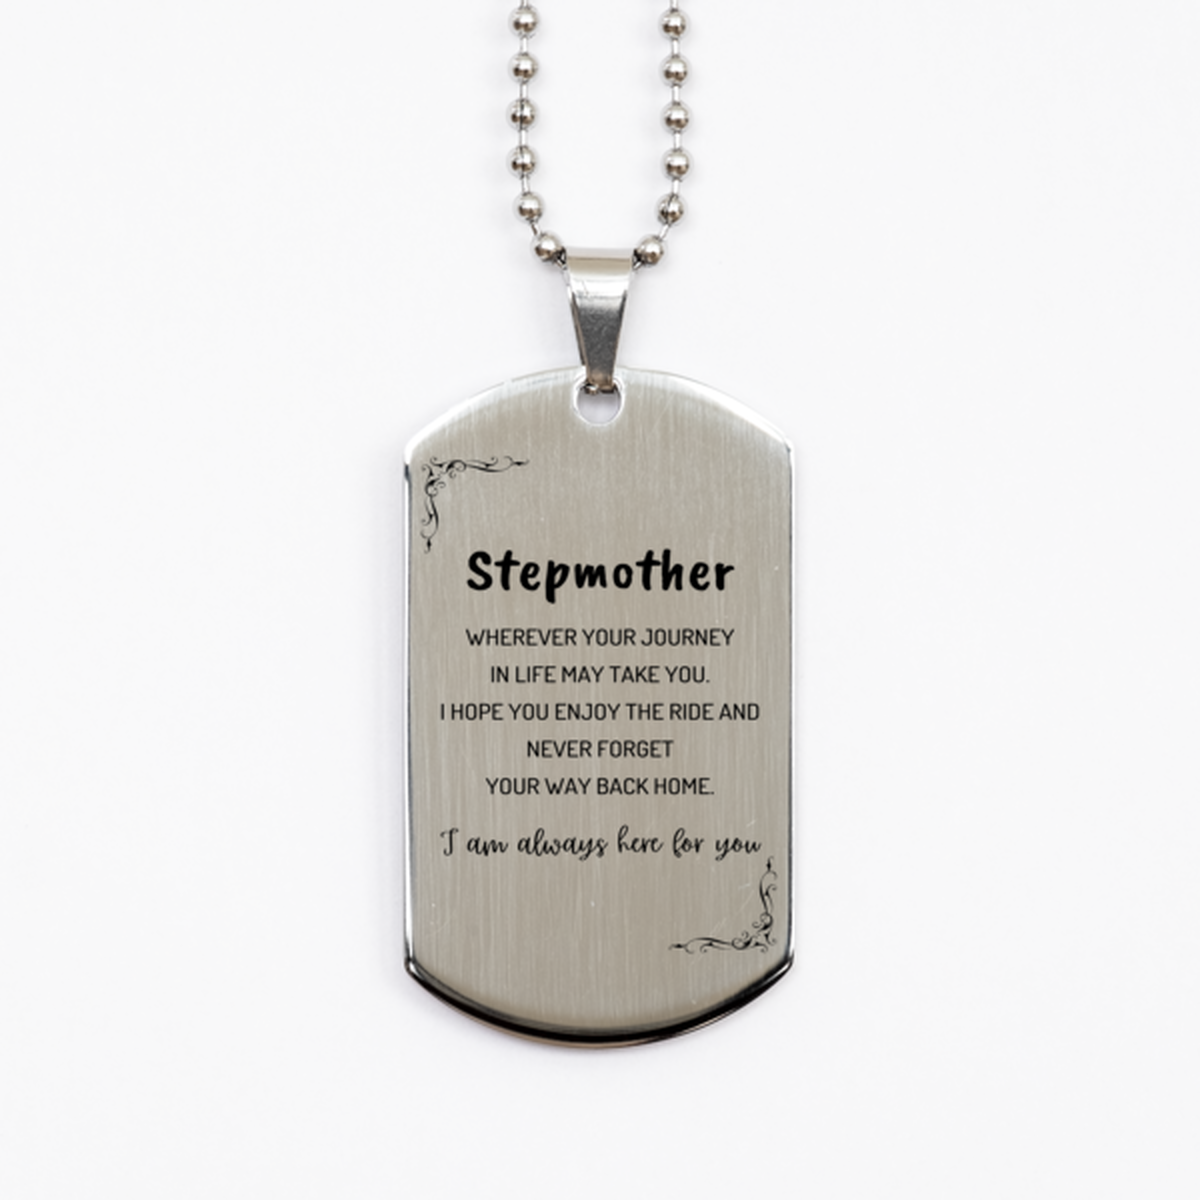 Stepmother wherever your journey in life may take you, I am always here for you Stepmother Silver Dog Tag, Awesome Christmas Gifts For Stepmother, Stepmother Birthday Gifts for Men Women Family Loved One